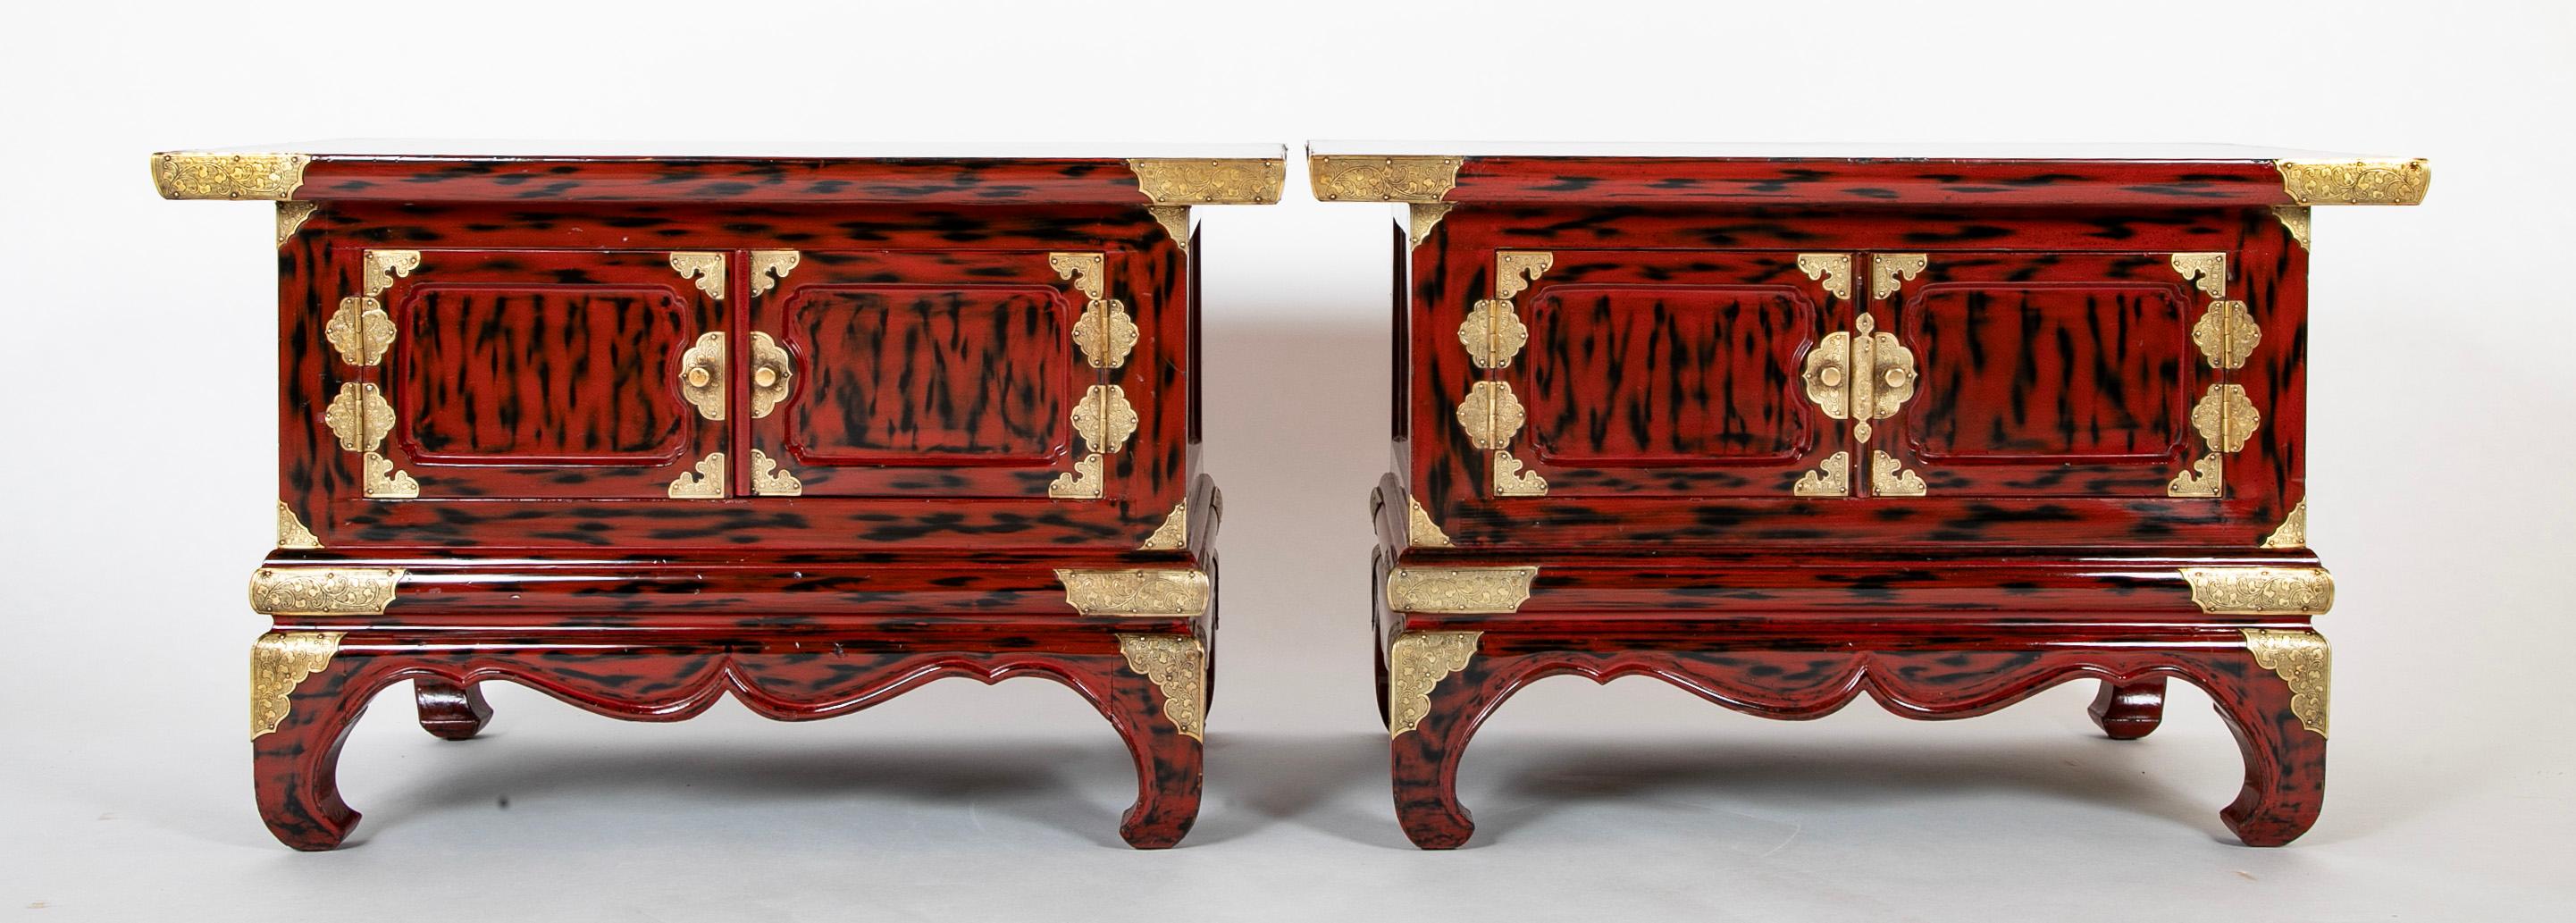 Great looking pair of late Meiji Period Japanese black and red lacquers side tables with etched brass mounts. Each with two doors that open for storage, this stunning pair with really stand out in any decor. Just back from my restorer, refreshed,